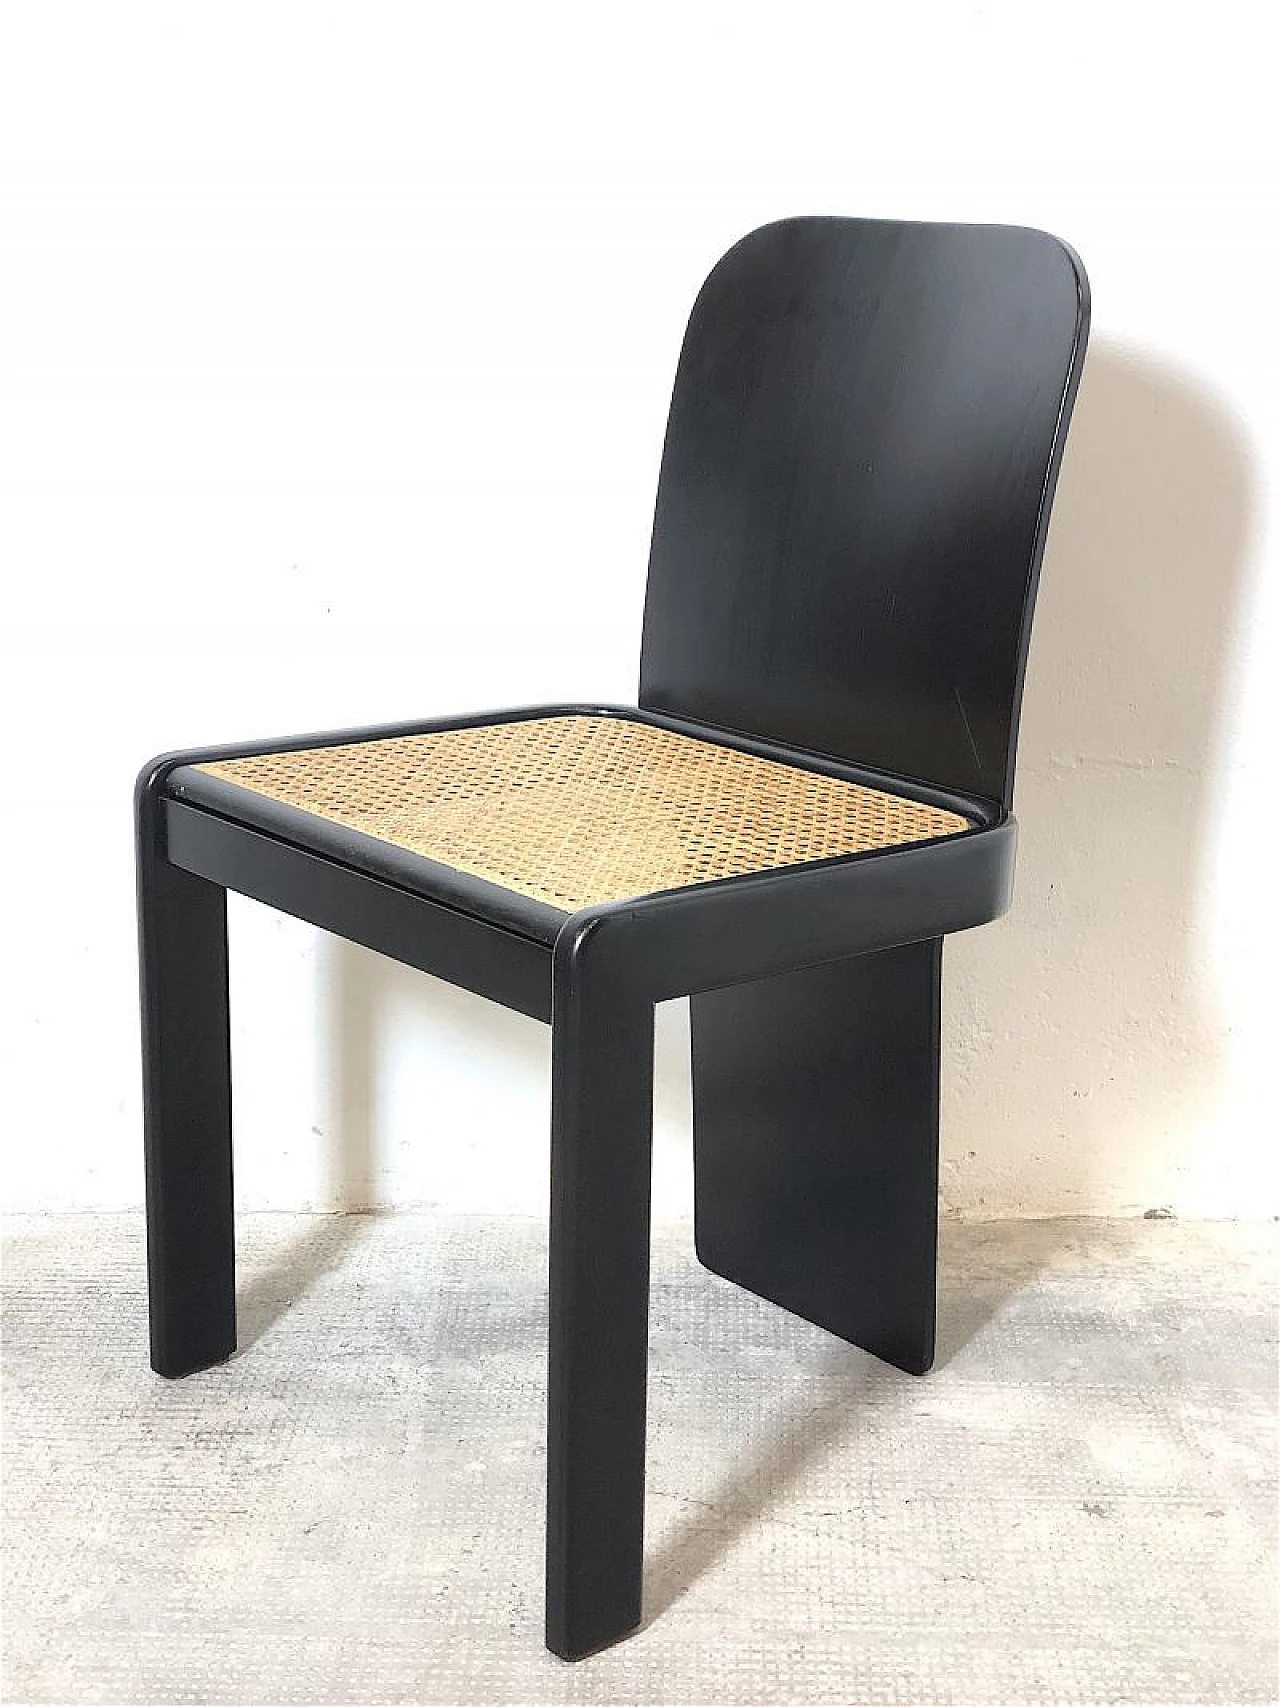 4 Chairs by Pierluigi Molinari for Pozzi and game table by Cini & Nils, 1970s 11